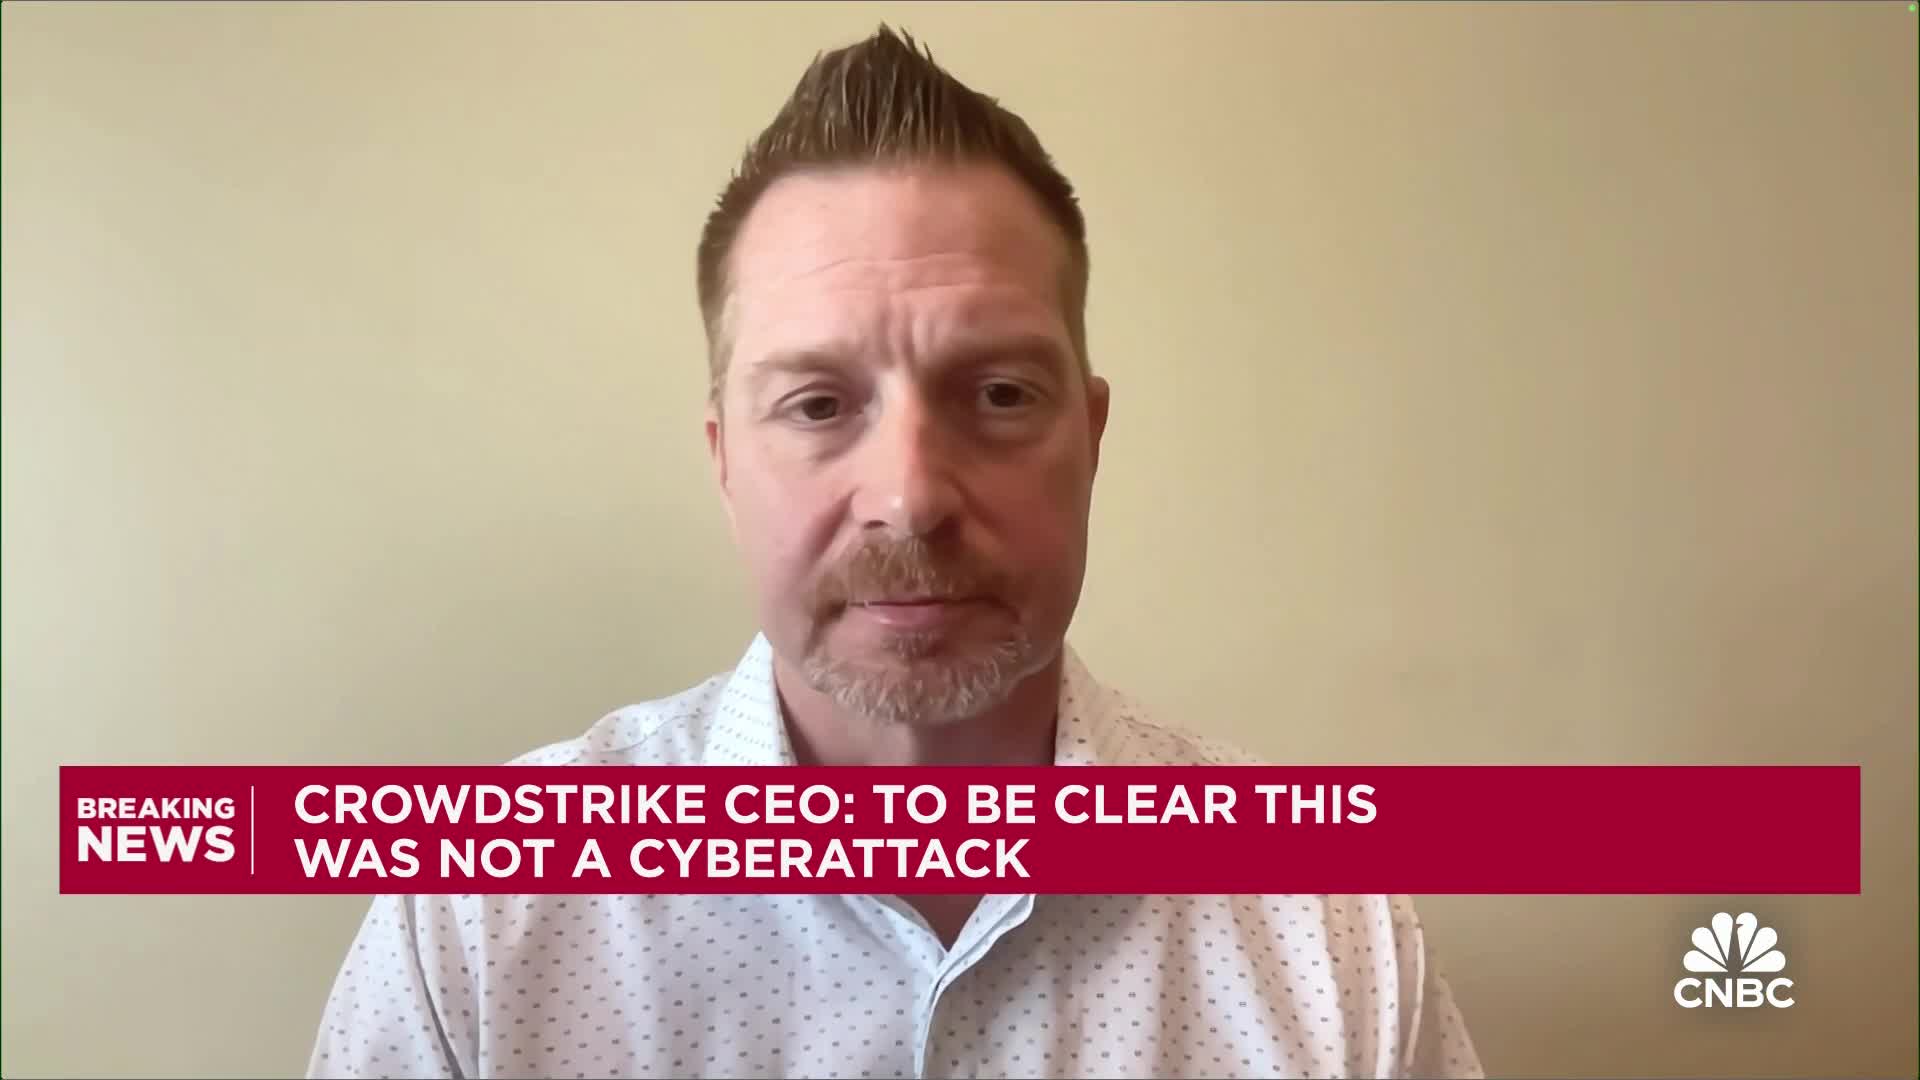 CrowdStrike CEO George Kurtz explains the cybersecurity firm's next steps after global outage